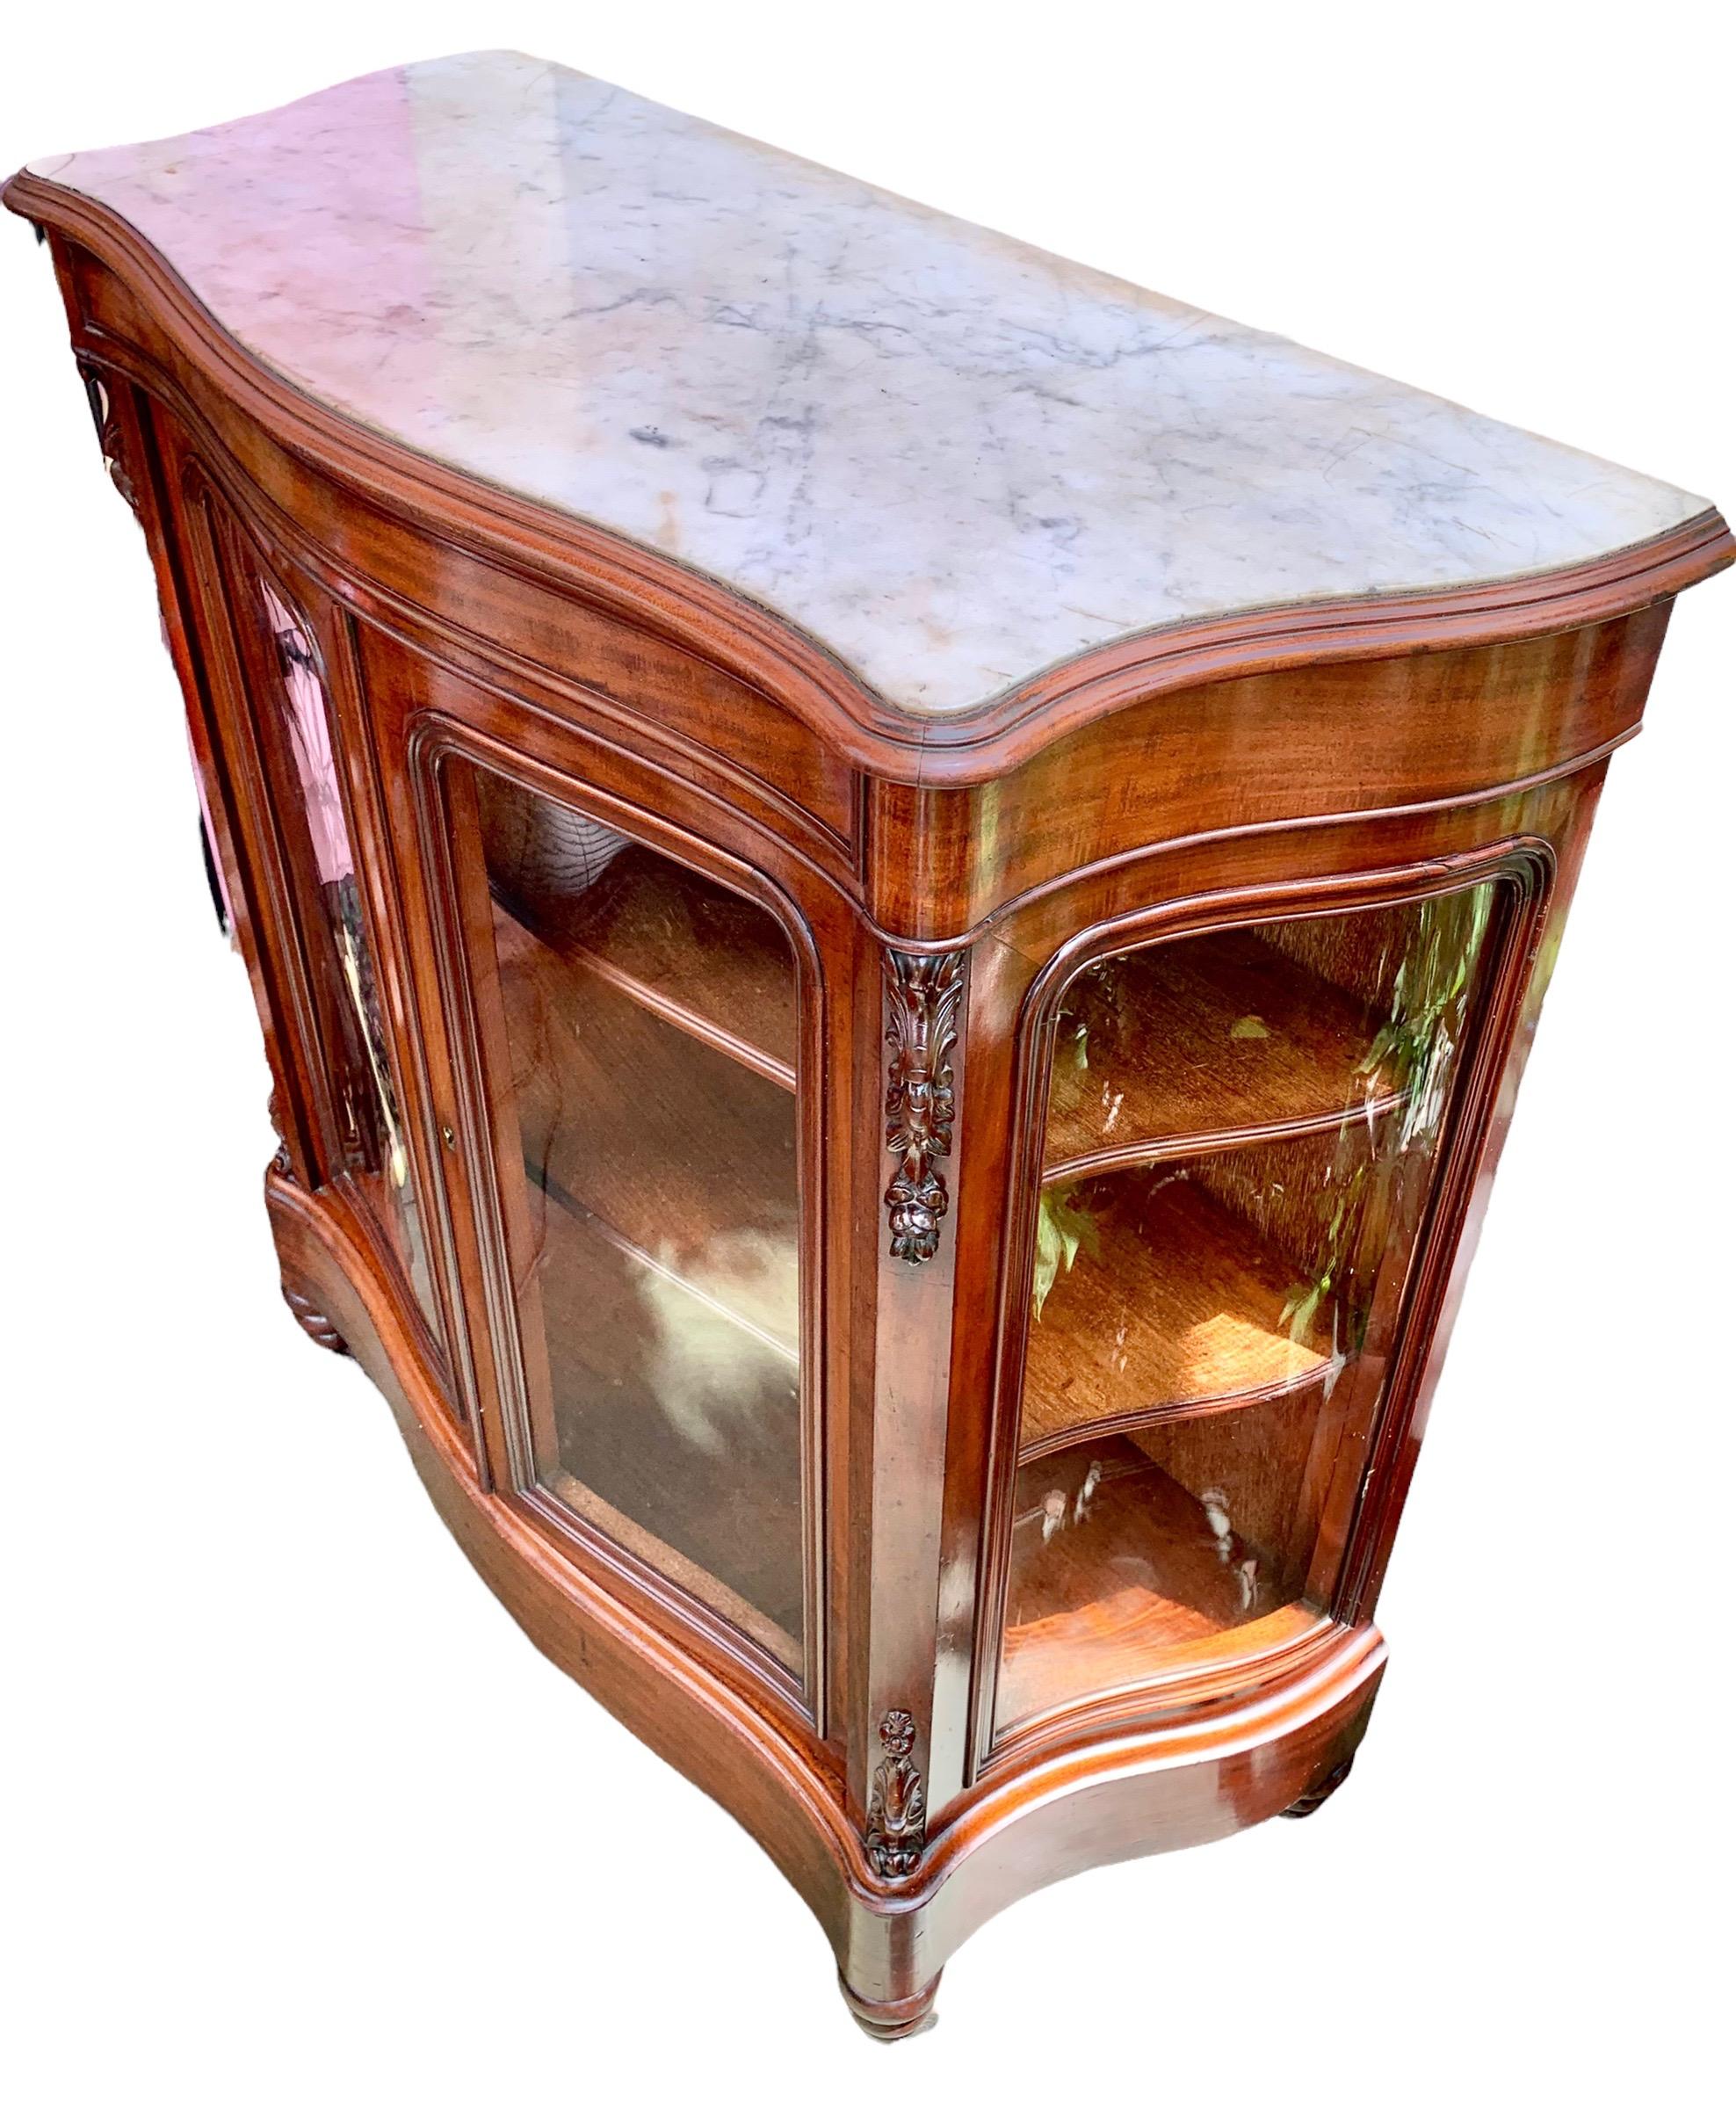 A French carved walnut marble top bowfront parlor cabinet, circa 1870, having a lovely inset white marble with double curved glass doors, flanked by curved glass sides. The plinth base above turned tapered legs with casters. The interior with two